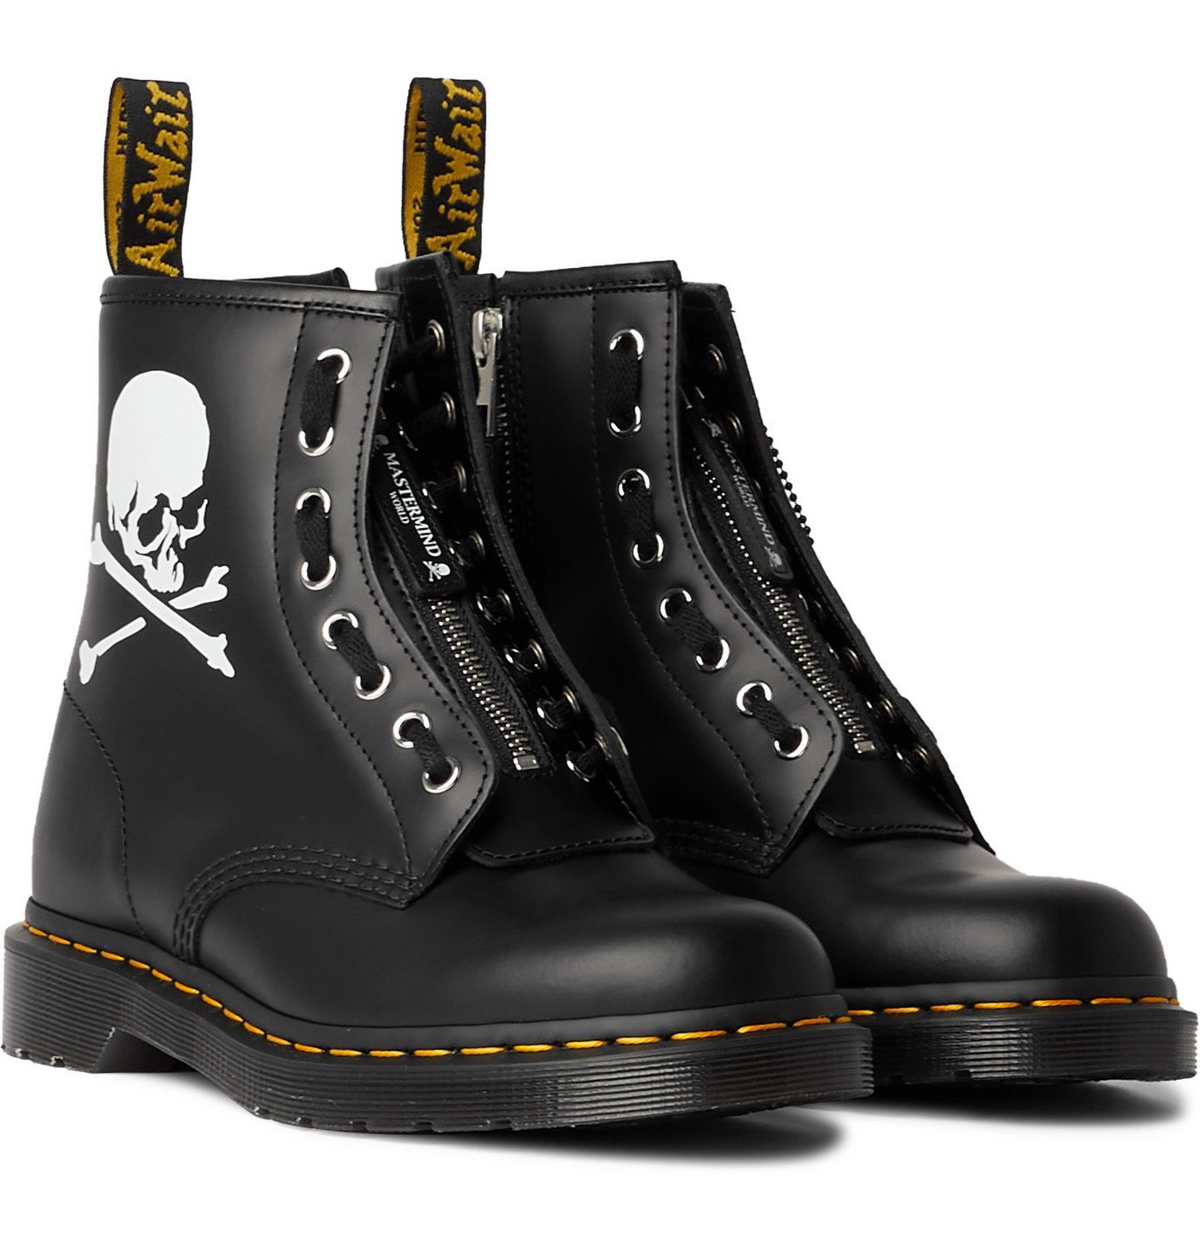 Dr. Martens - MASTERMIND WORLD 1460 Printed Leather Boots - Black